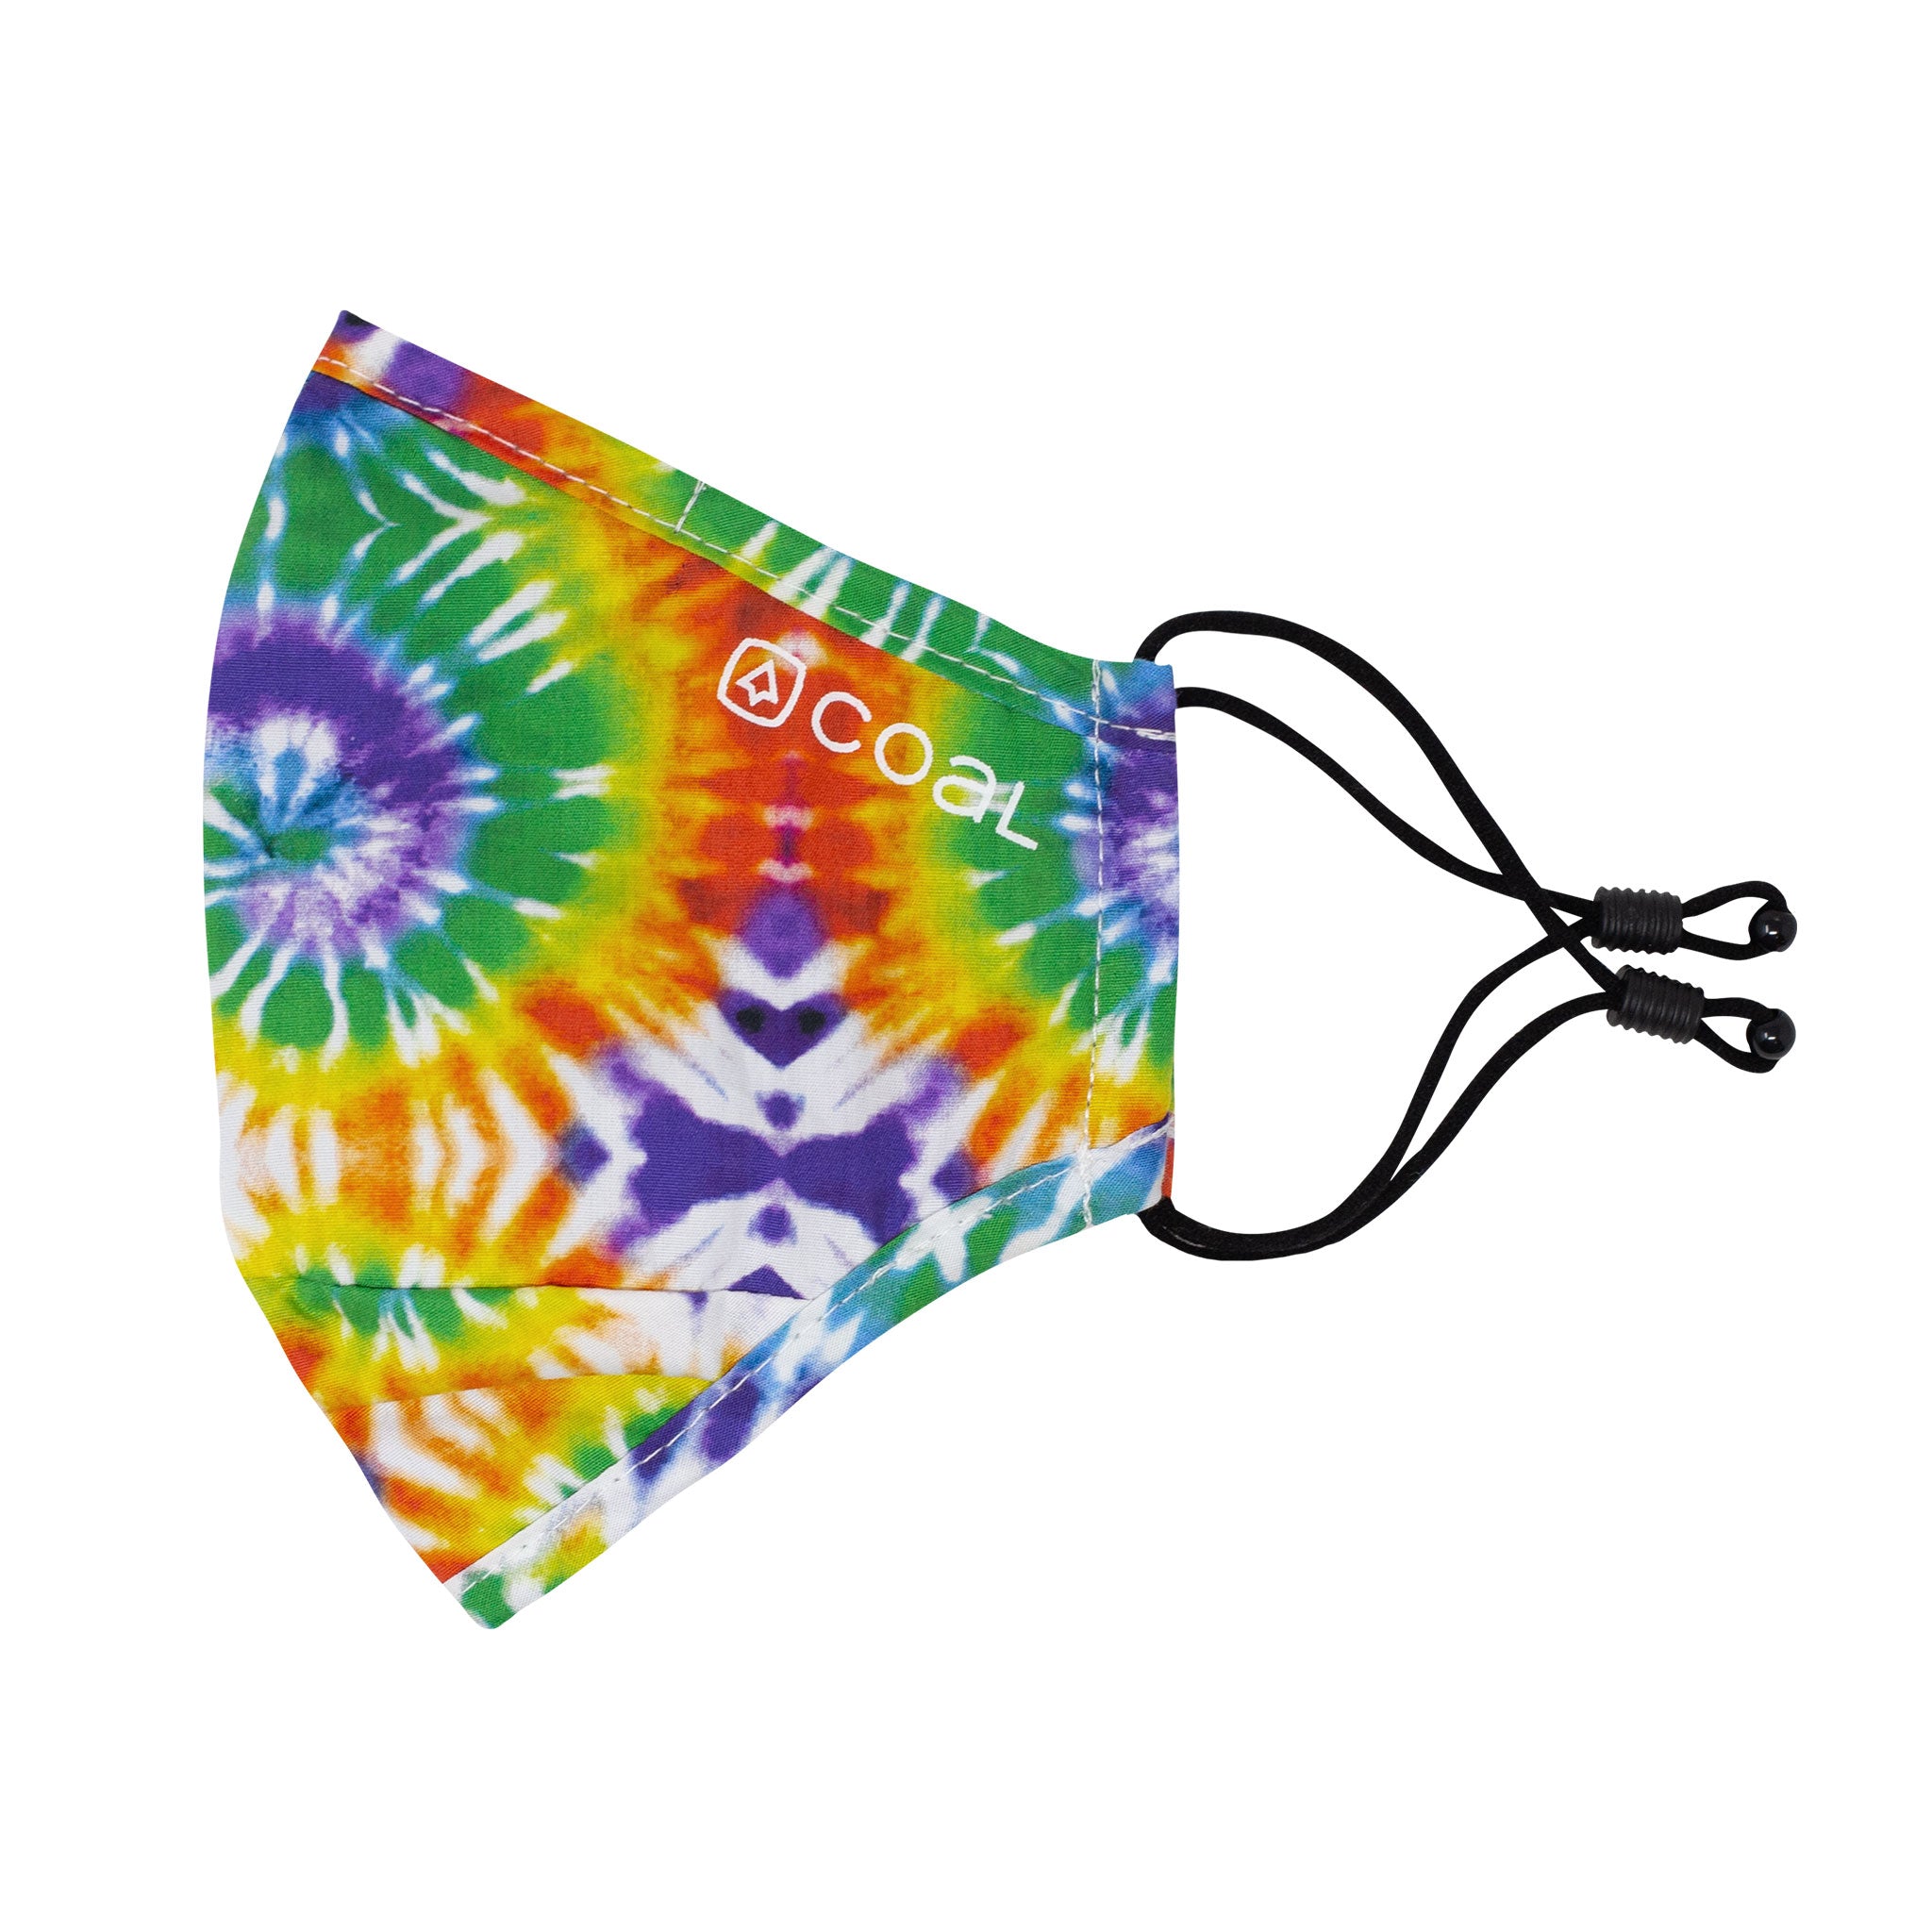 The Ergo Face Mask with Filter Pocket - Tie Dye Print, Rainbow